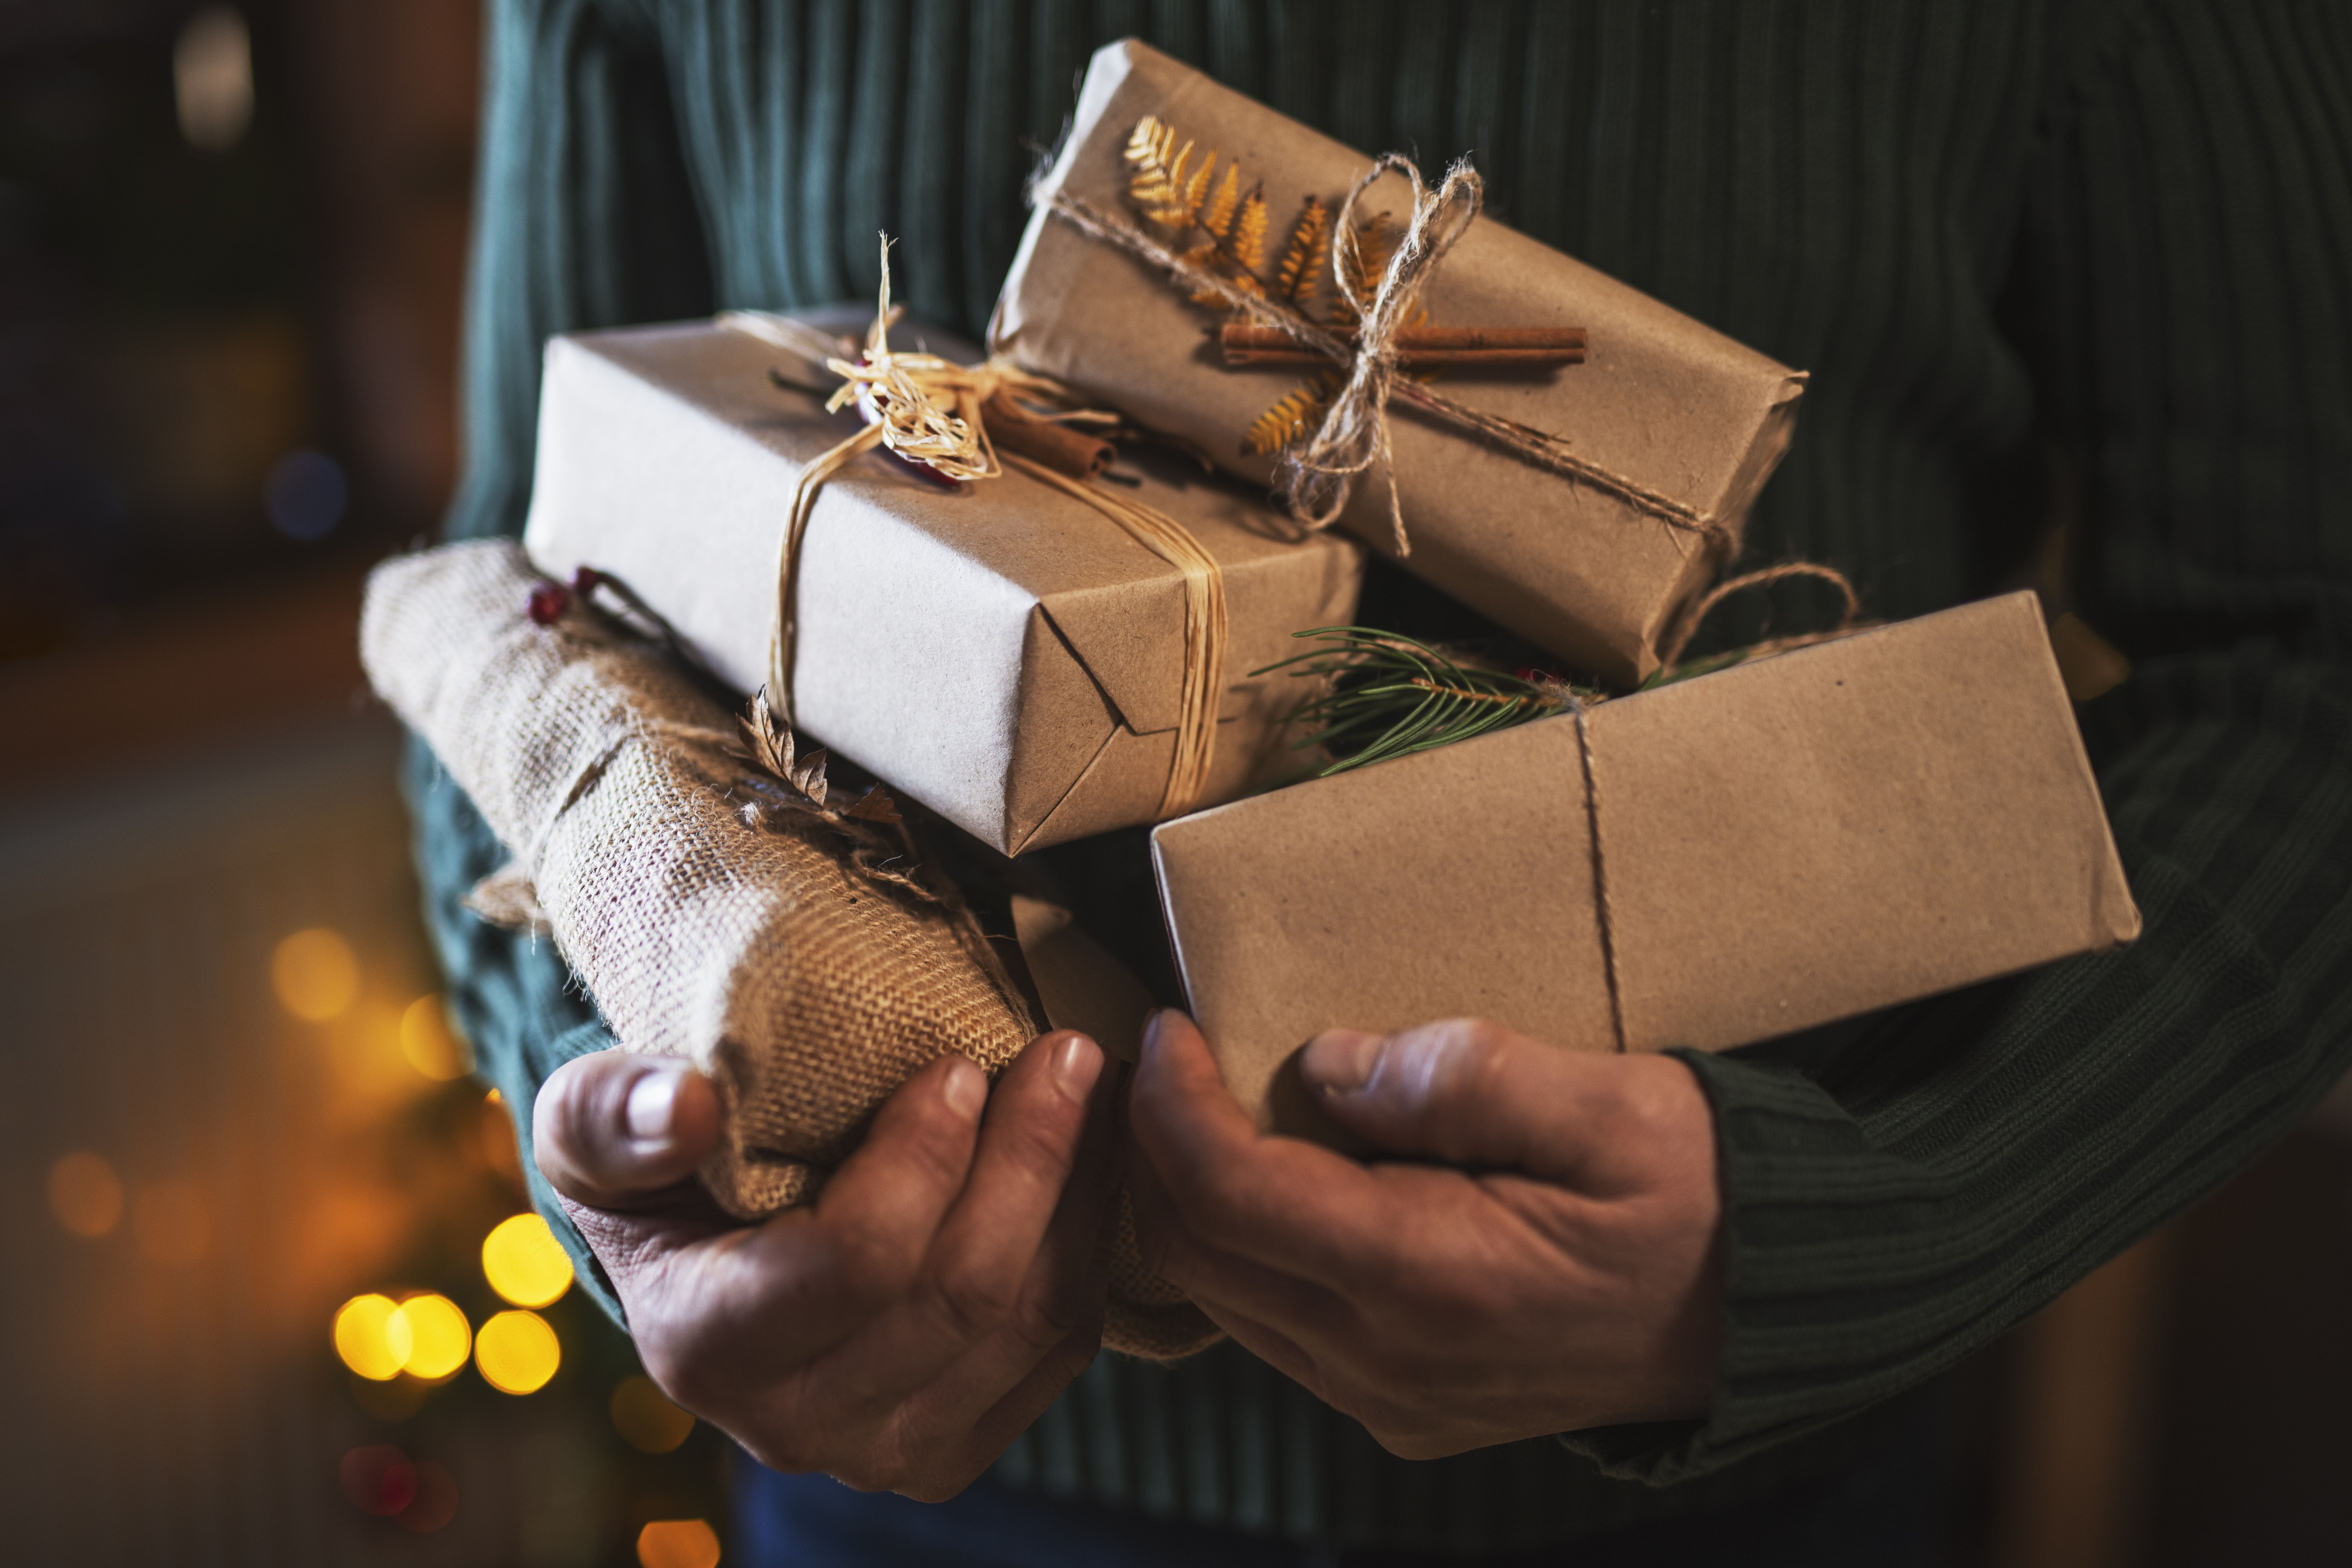 5 Ways to Be More Sustainable During the Holiday Season